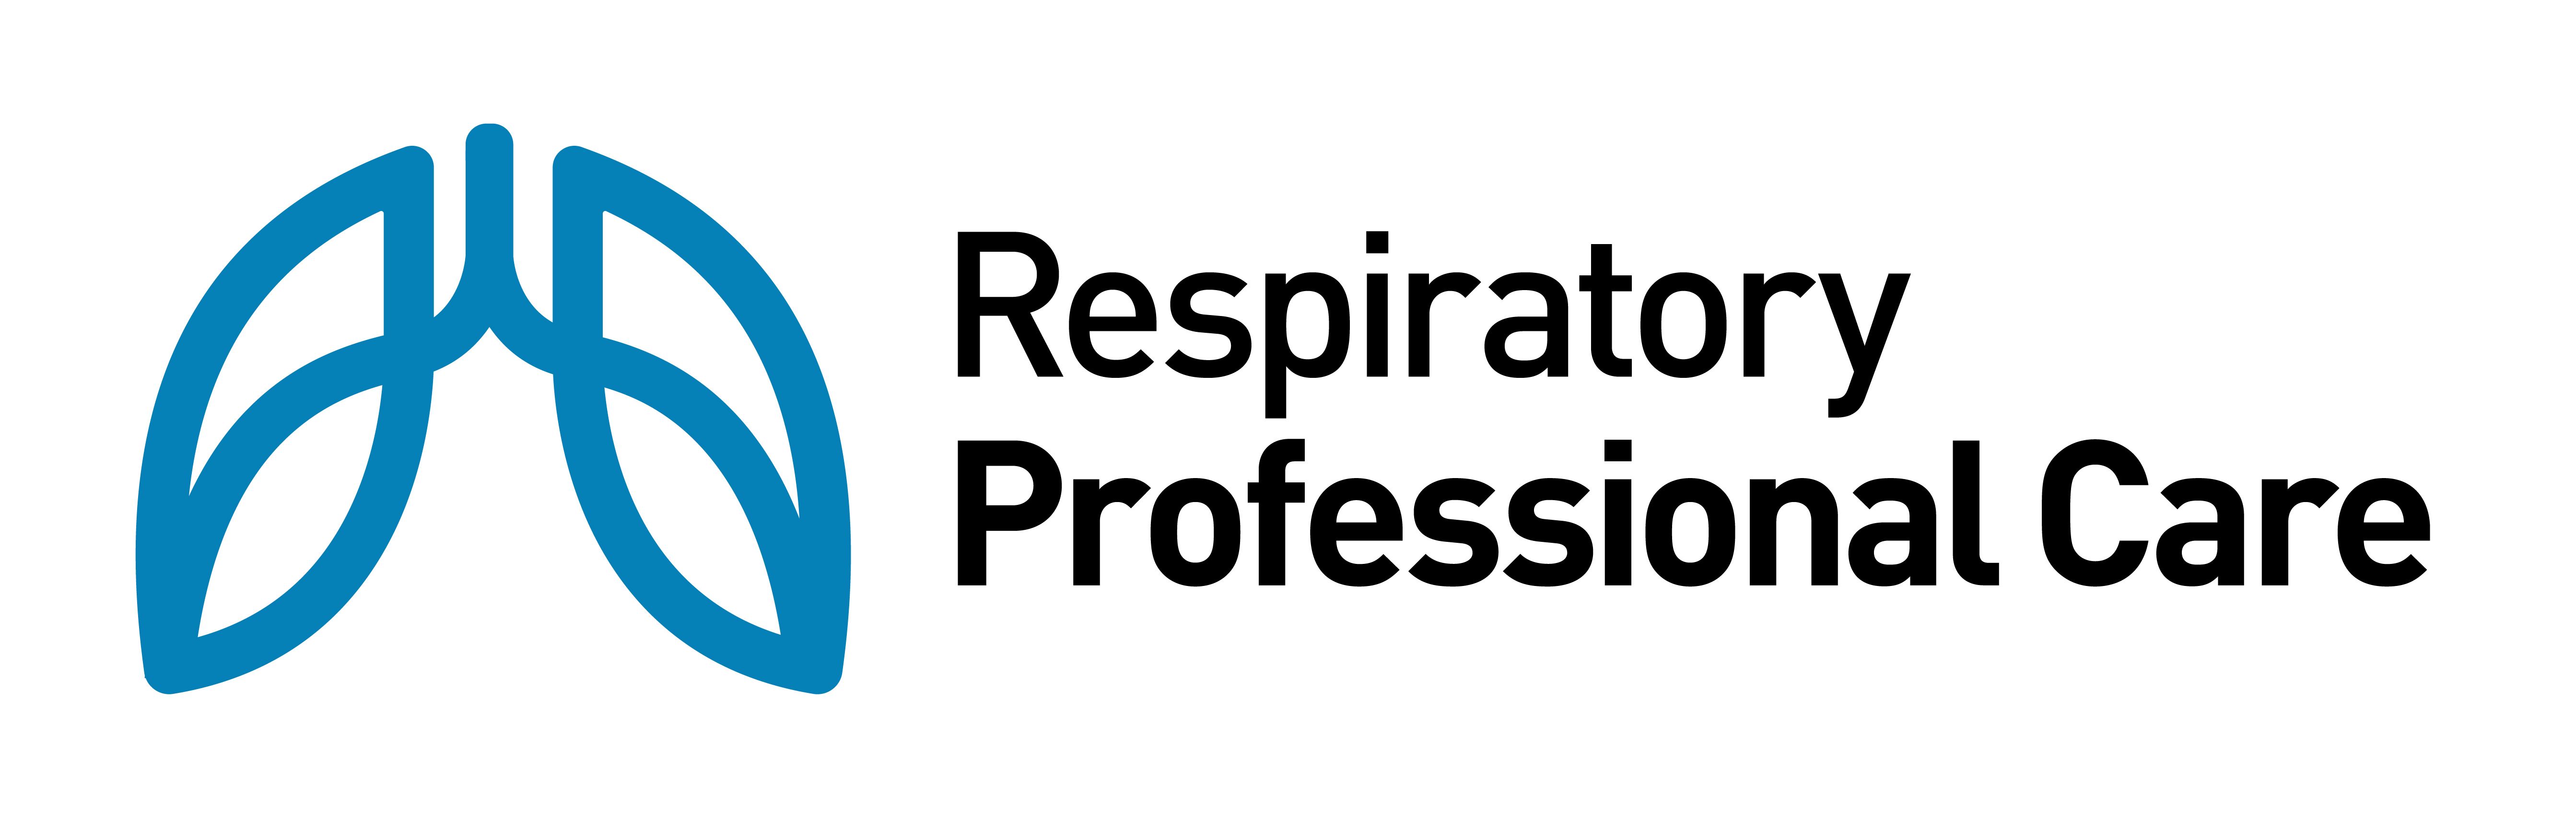 Welcome - Respiratory Professional Care 2021 Professional Care 2021